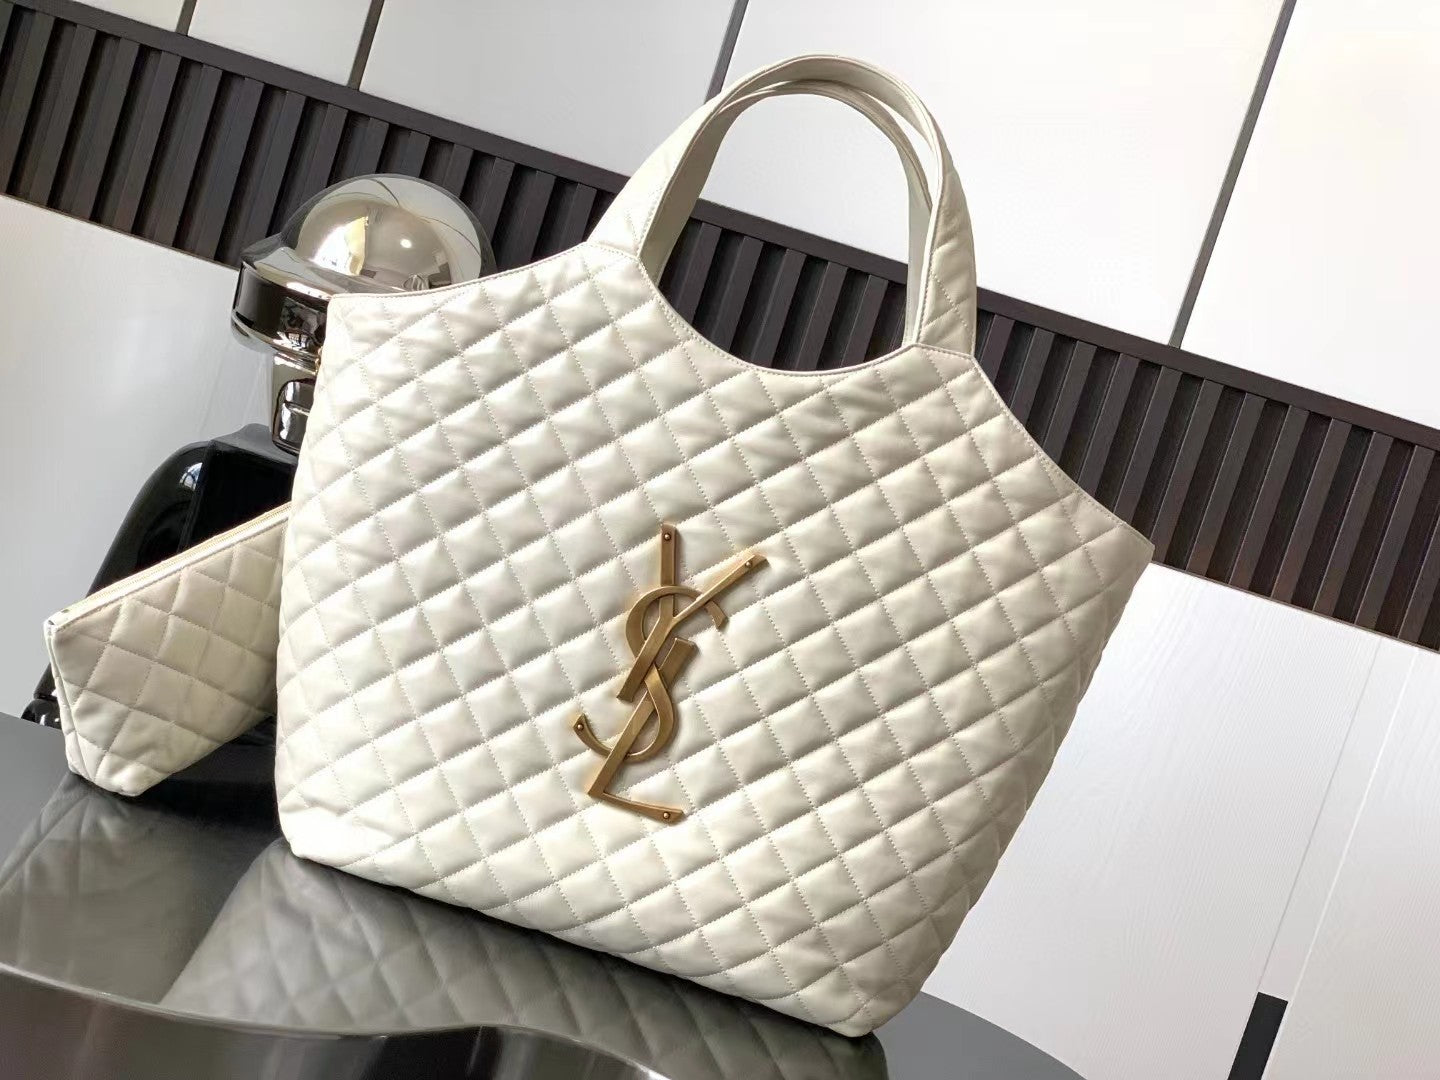 YSL ICARE MAXI SHOPPING BAG IN QUILTED LAMBSKIN – White 698651